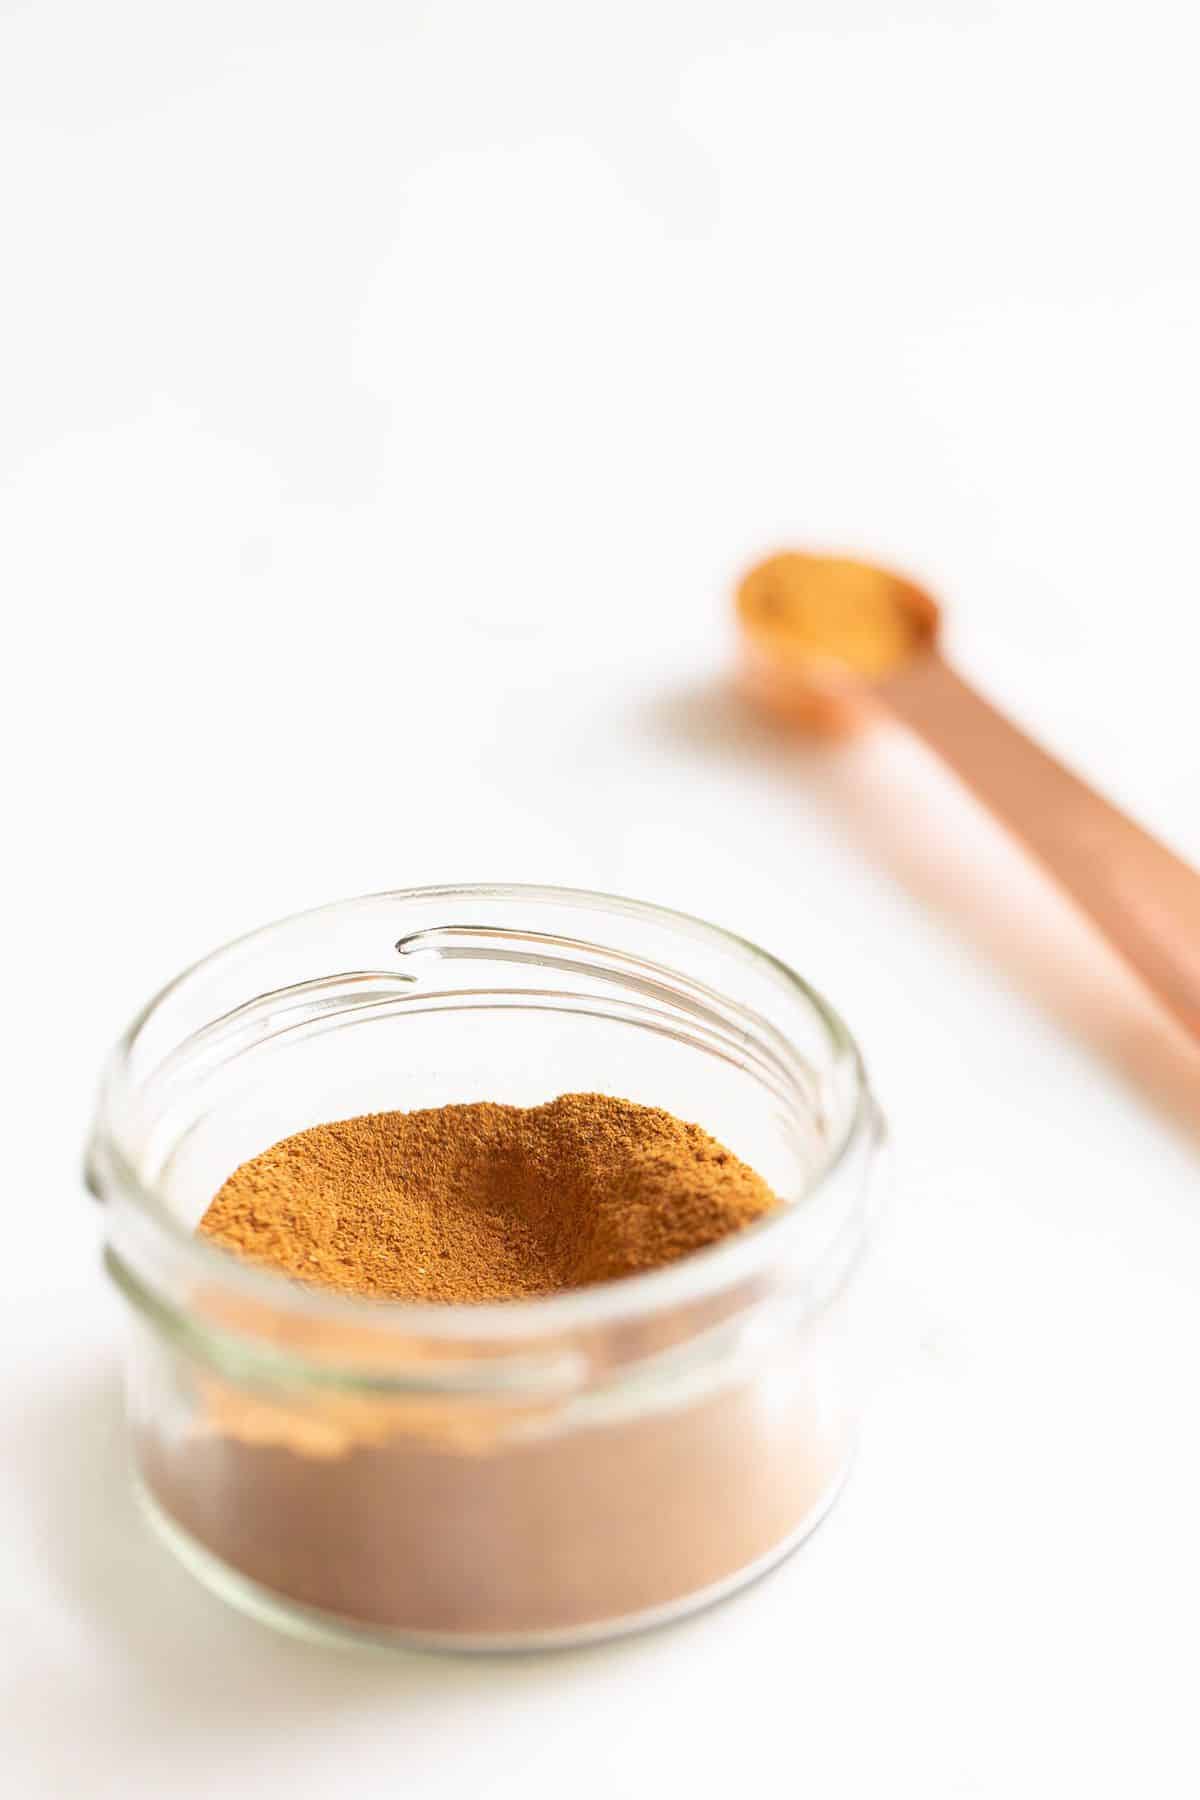 Small glass jar filled with spice mix on a white surface, teaspoon in background.